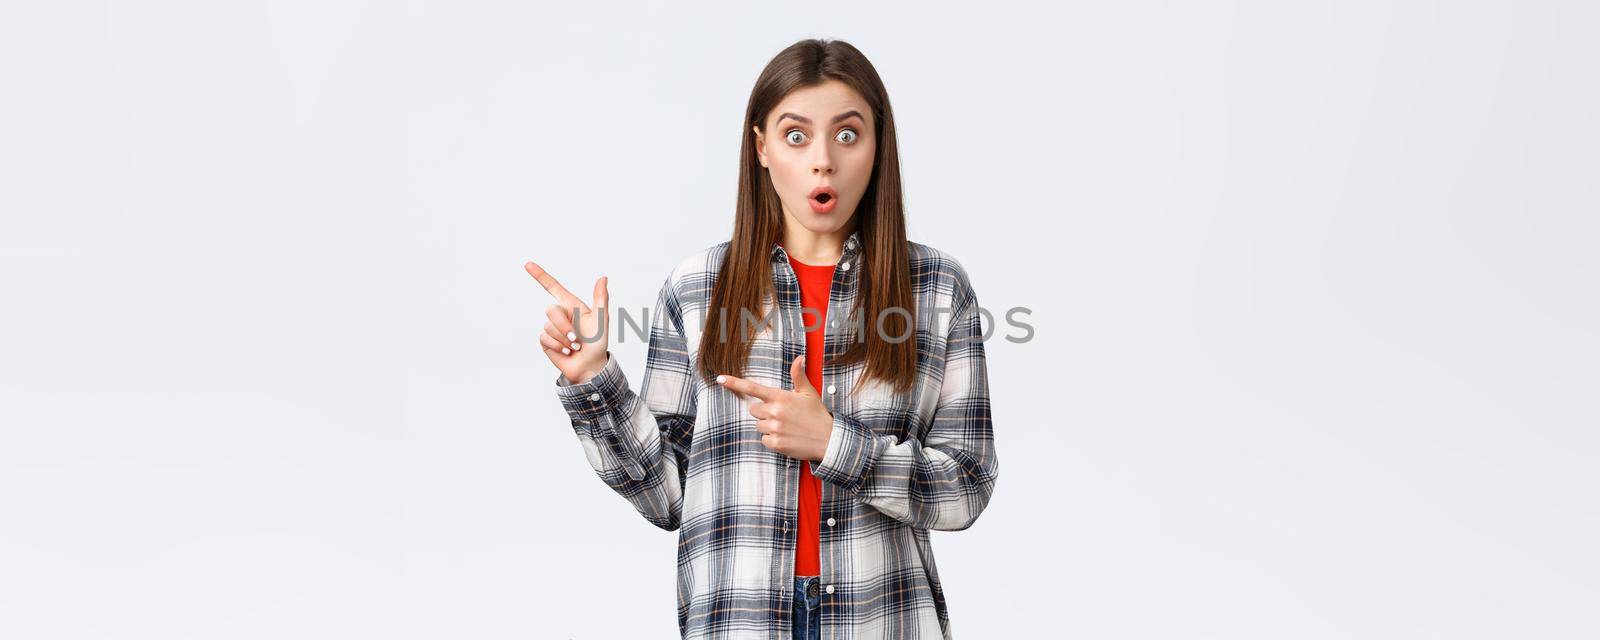 Lifestyle, different emotions, leisure activities concept. Impressed female customer, girl in casual checked shirt, say wow talking about news and pointing fingers left, white background.